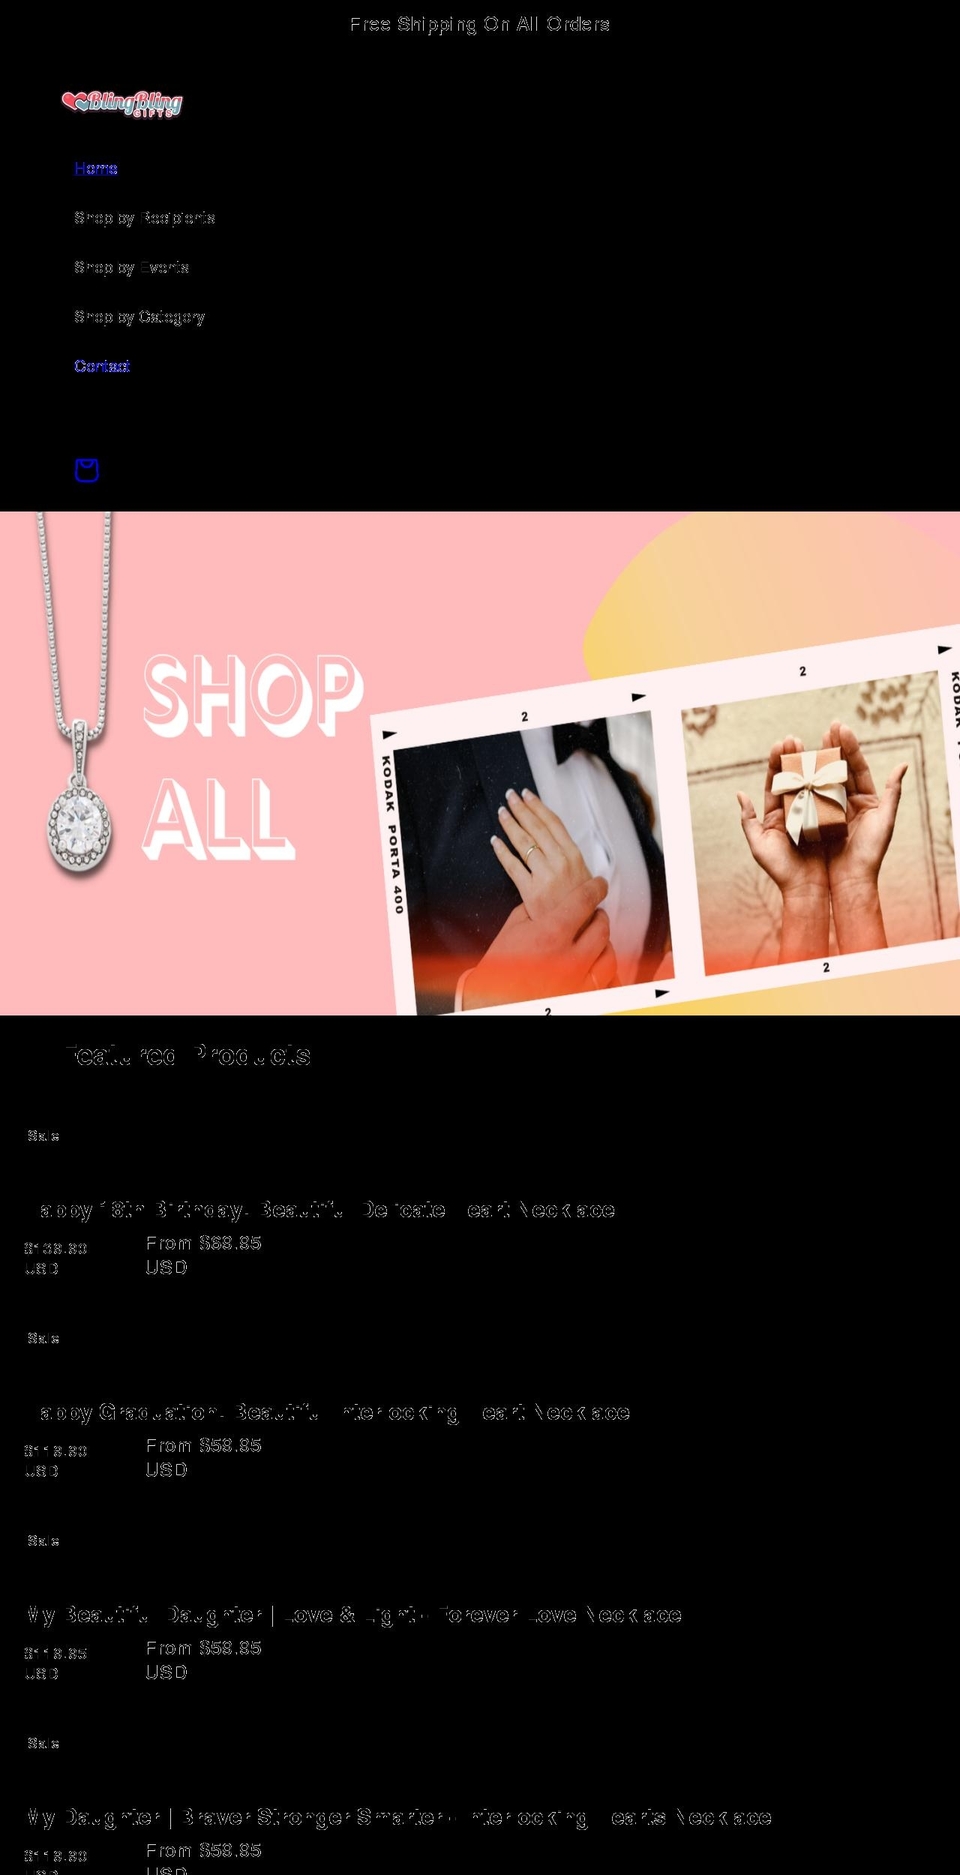 Gifts Shopify theme site example blingblinggifts.com